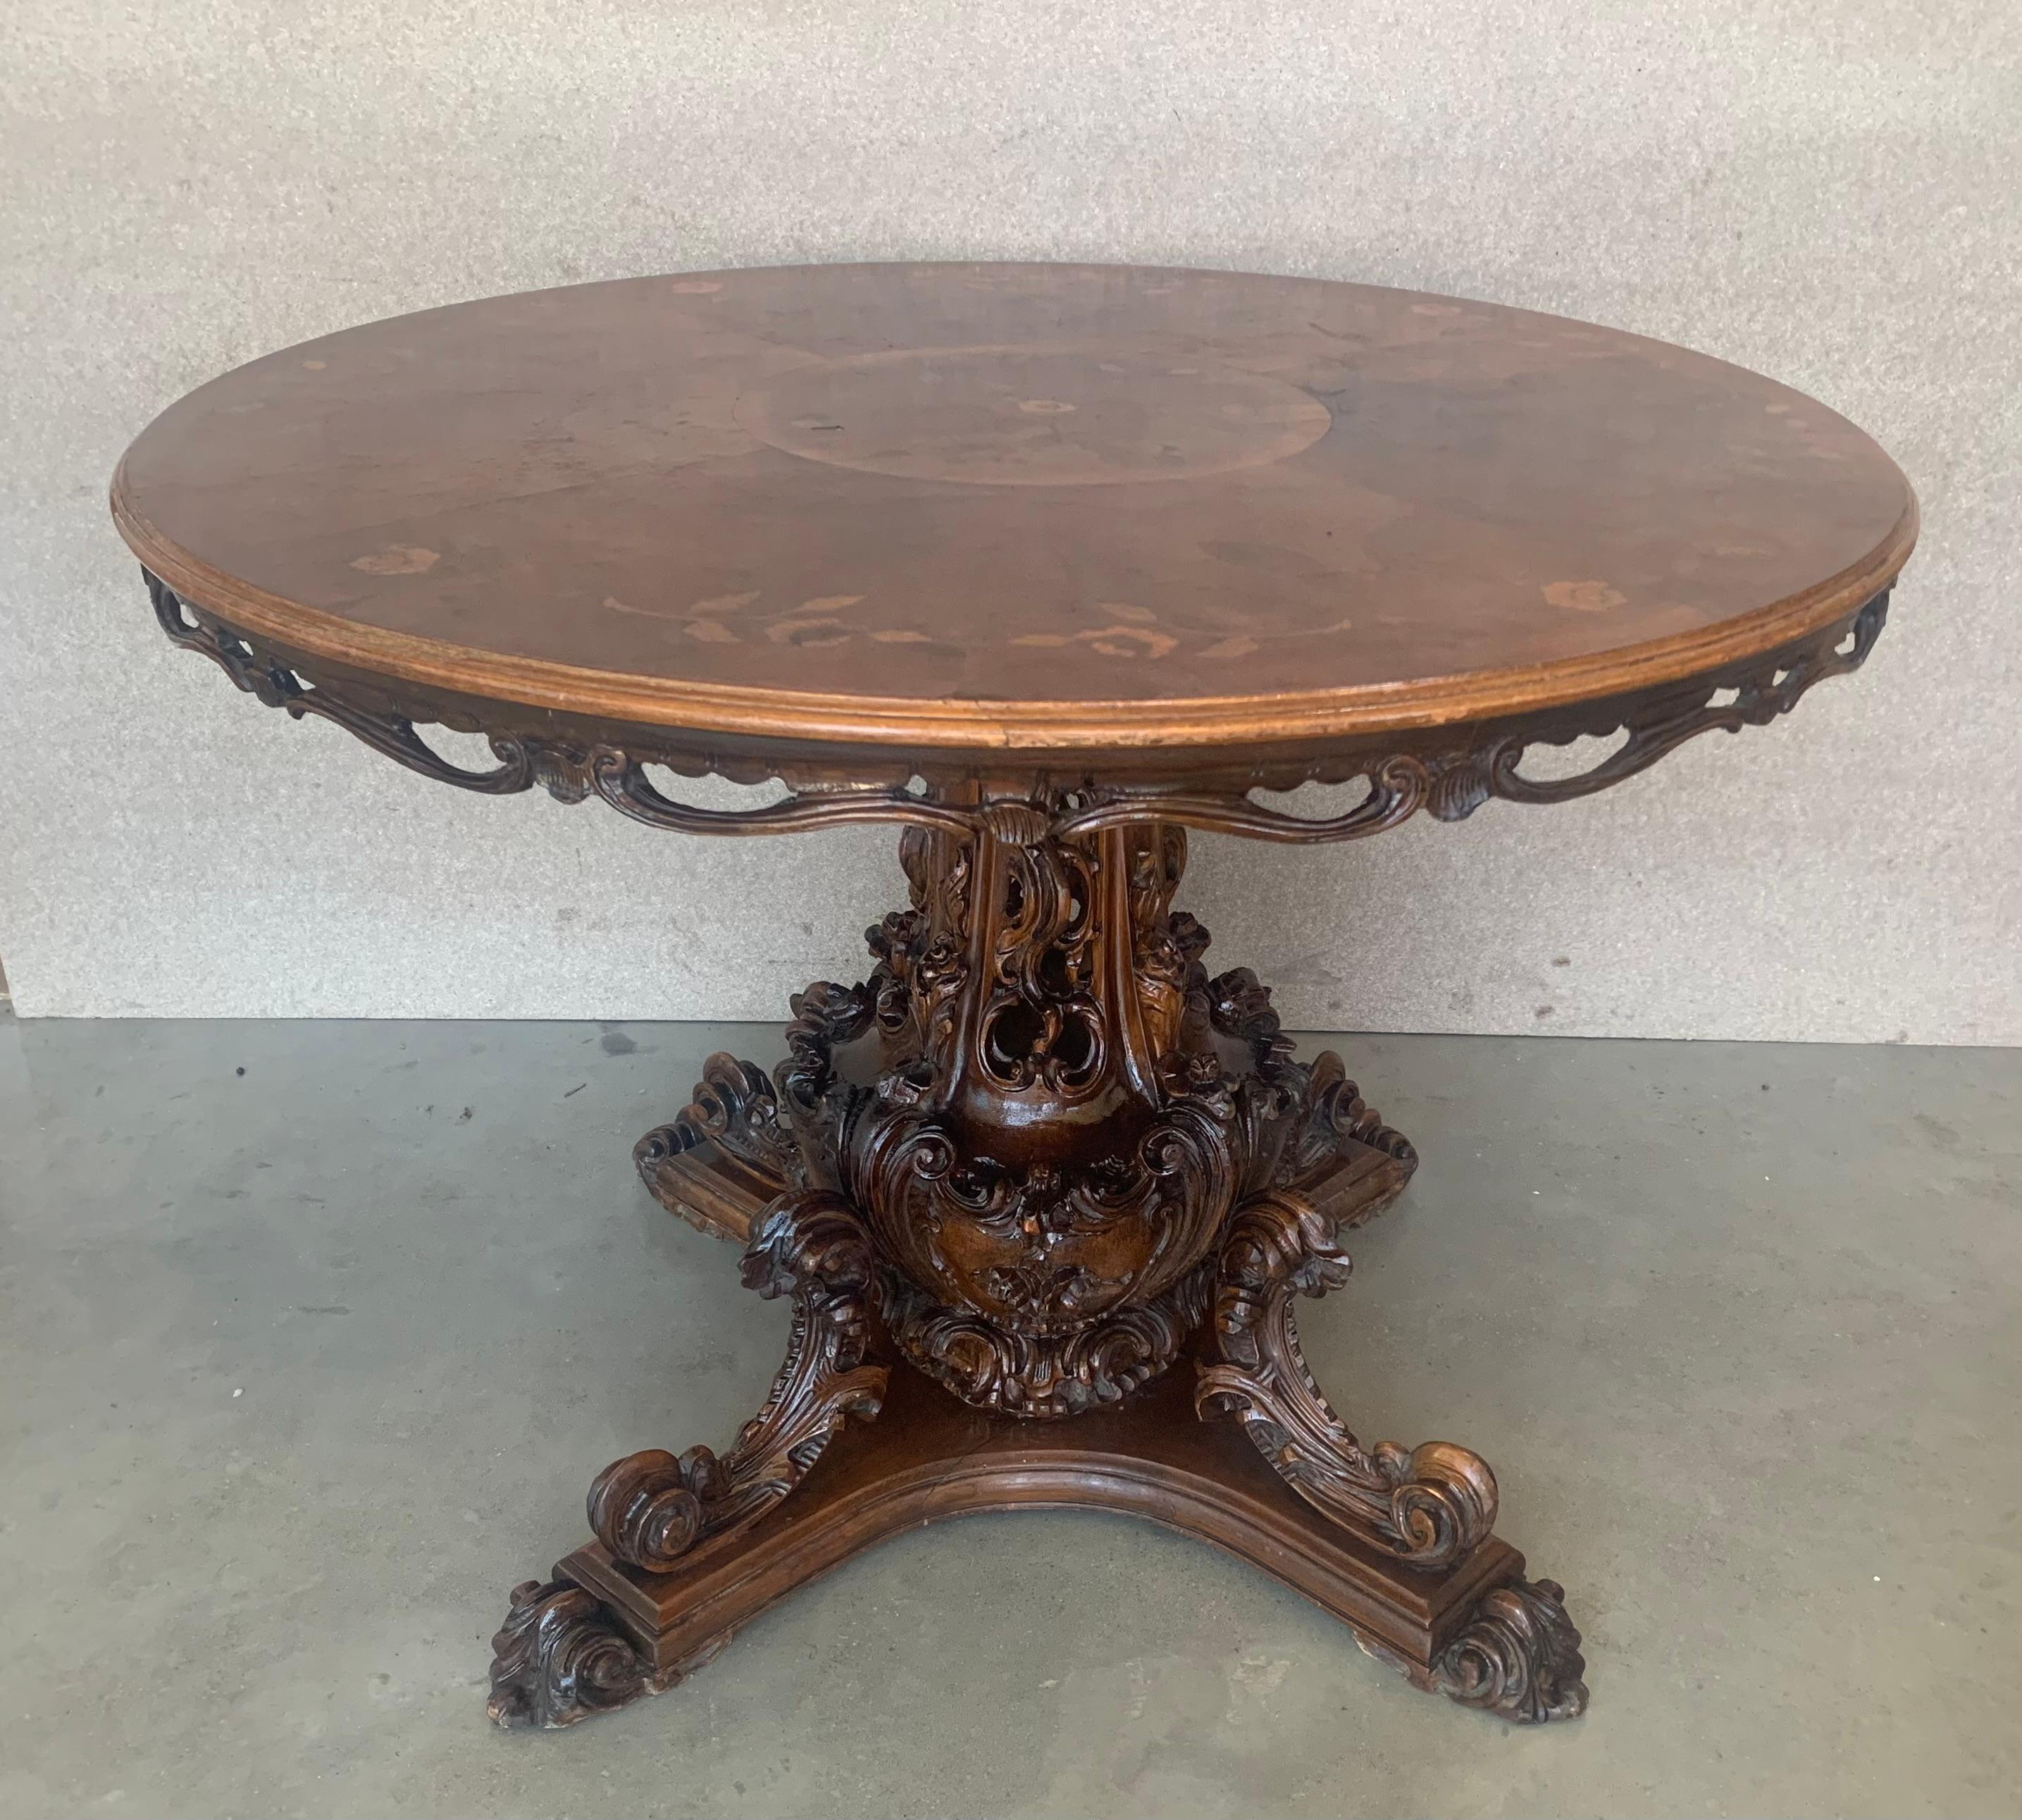 Rococo English Regency Round Table with Carved Center Pedestal in Mahogany, circa 1825